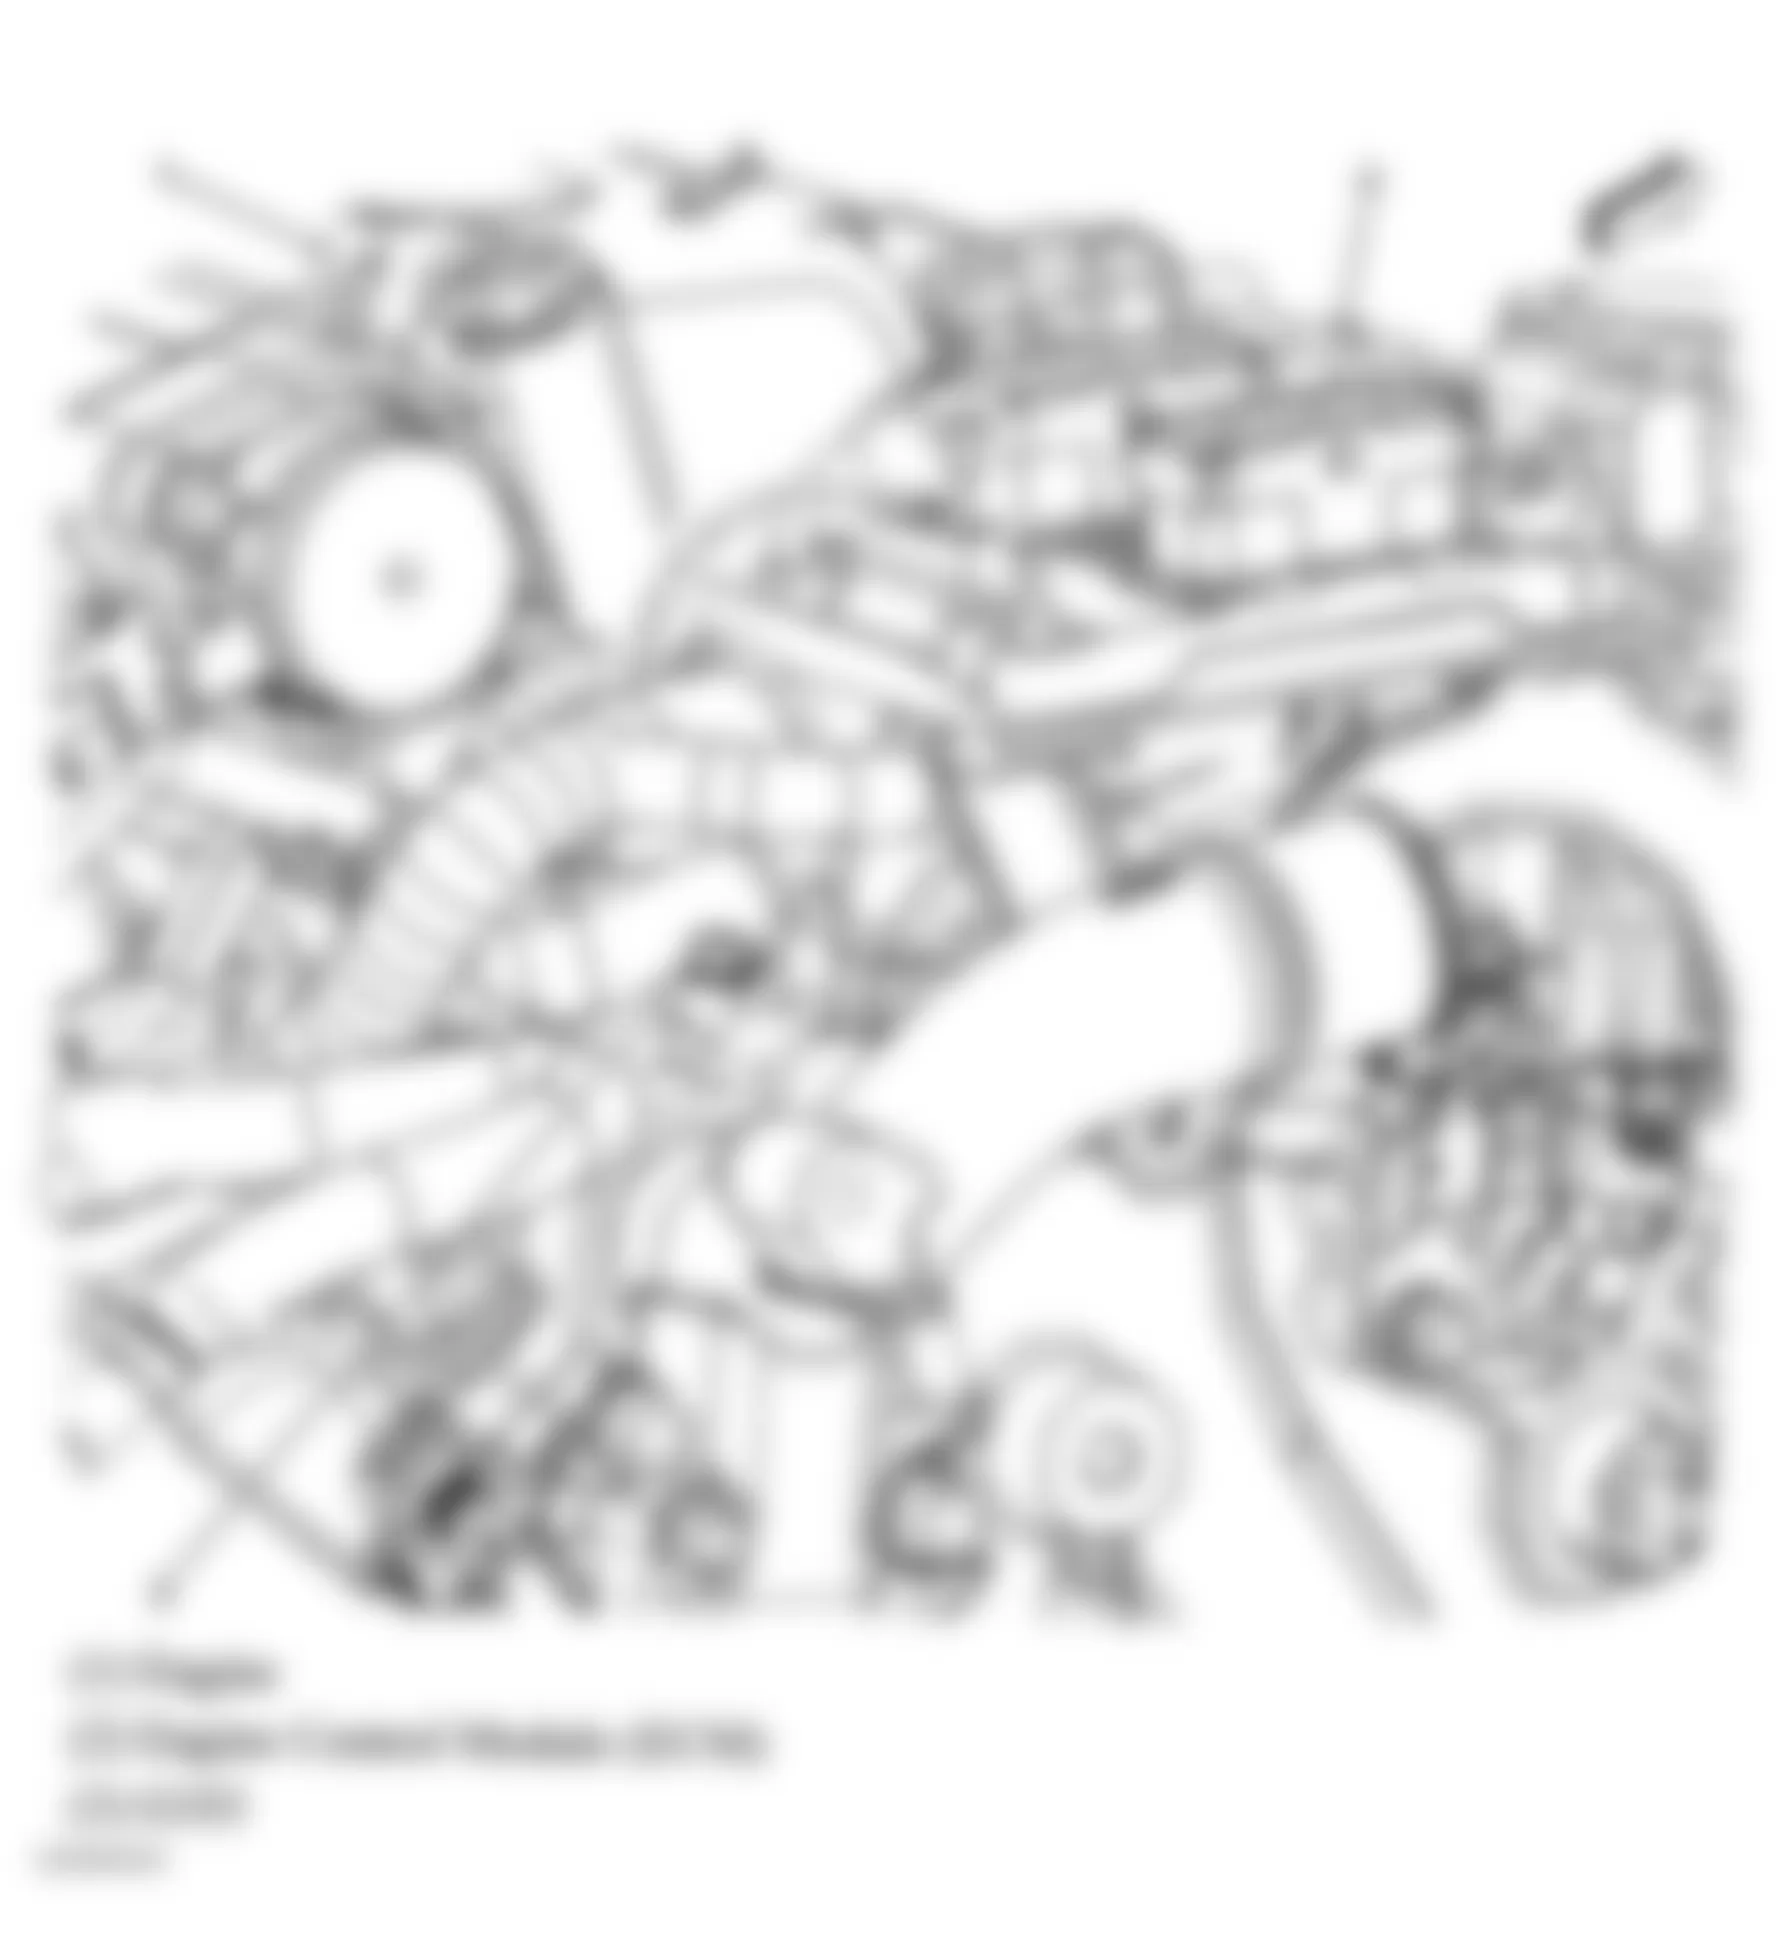 Buick LaCrosse CXL 2008 - Component Locations -  Engine Assembly (3.6L)